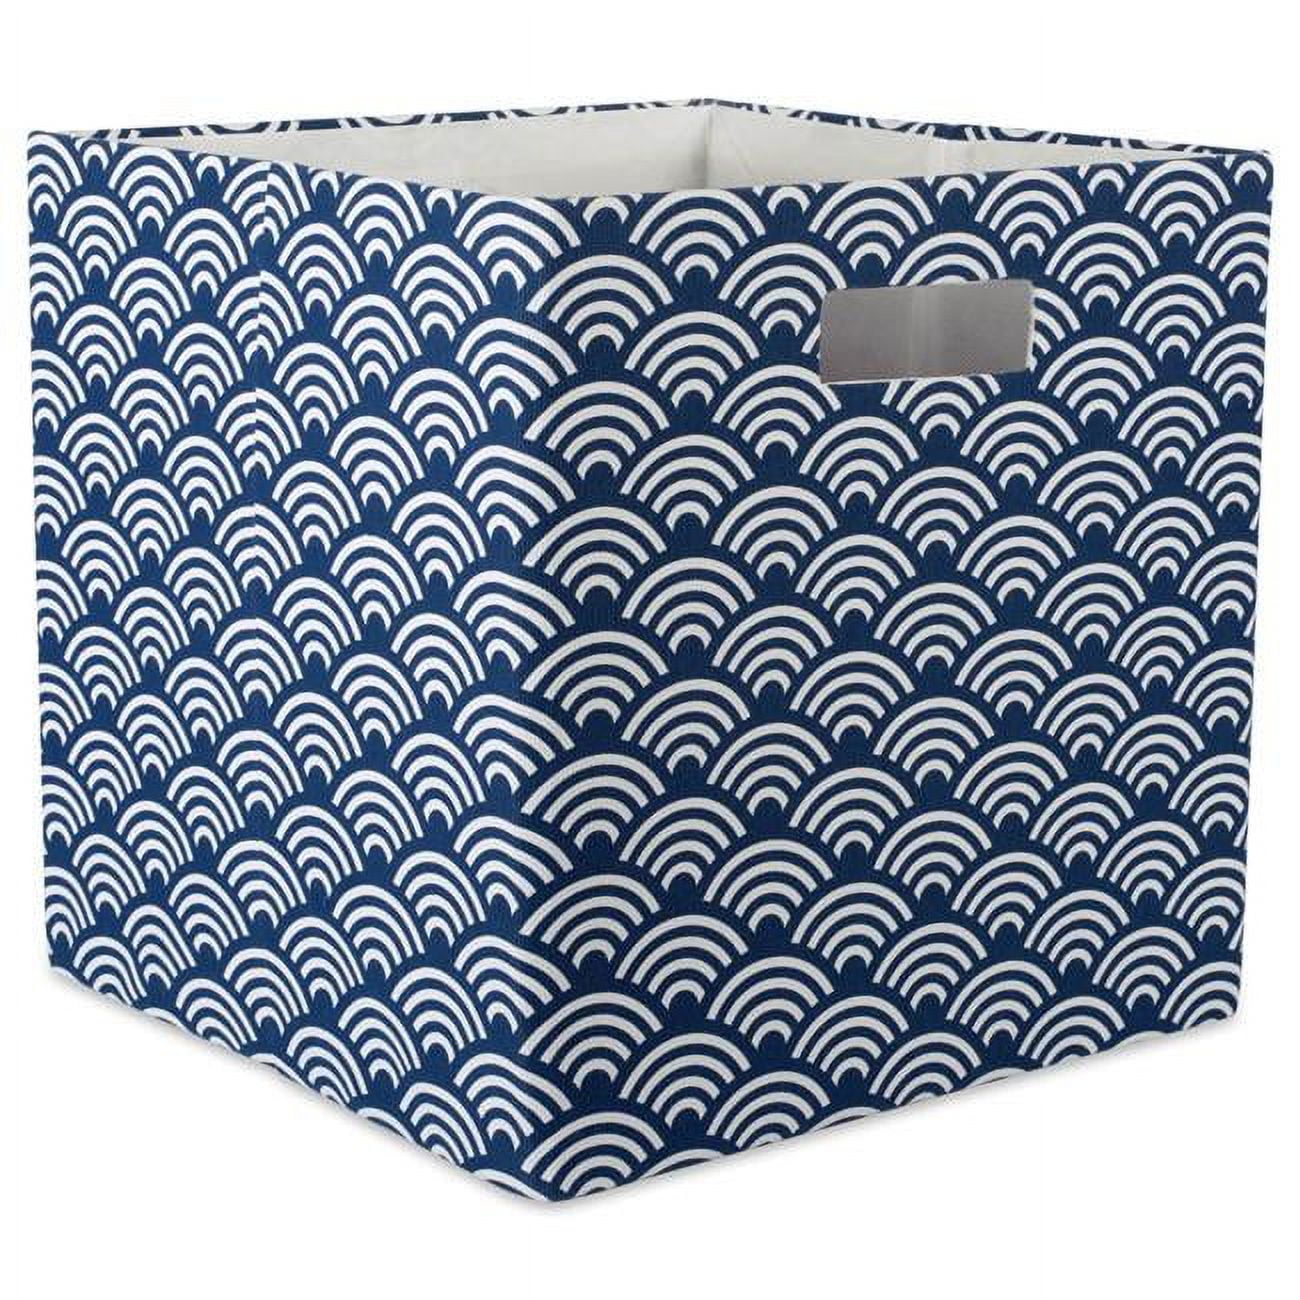 Design Imports Camz36638 11 X 11 X 11 In. Waves Square Polyester Storage Cube, Nautical Blue